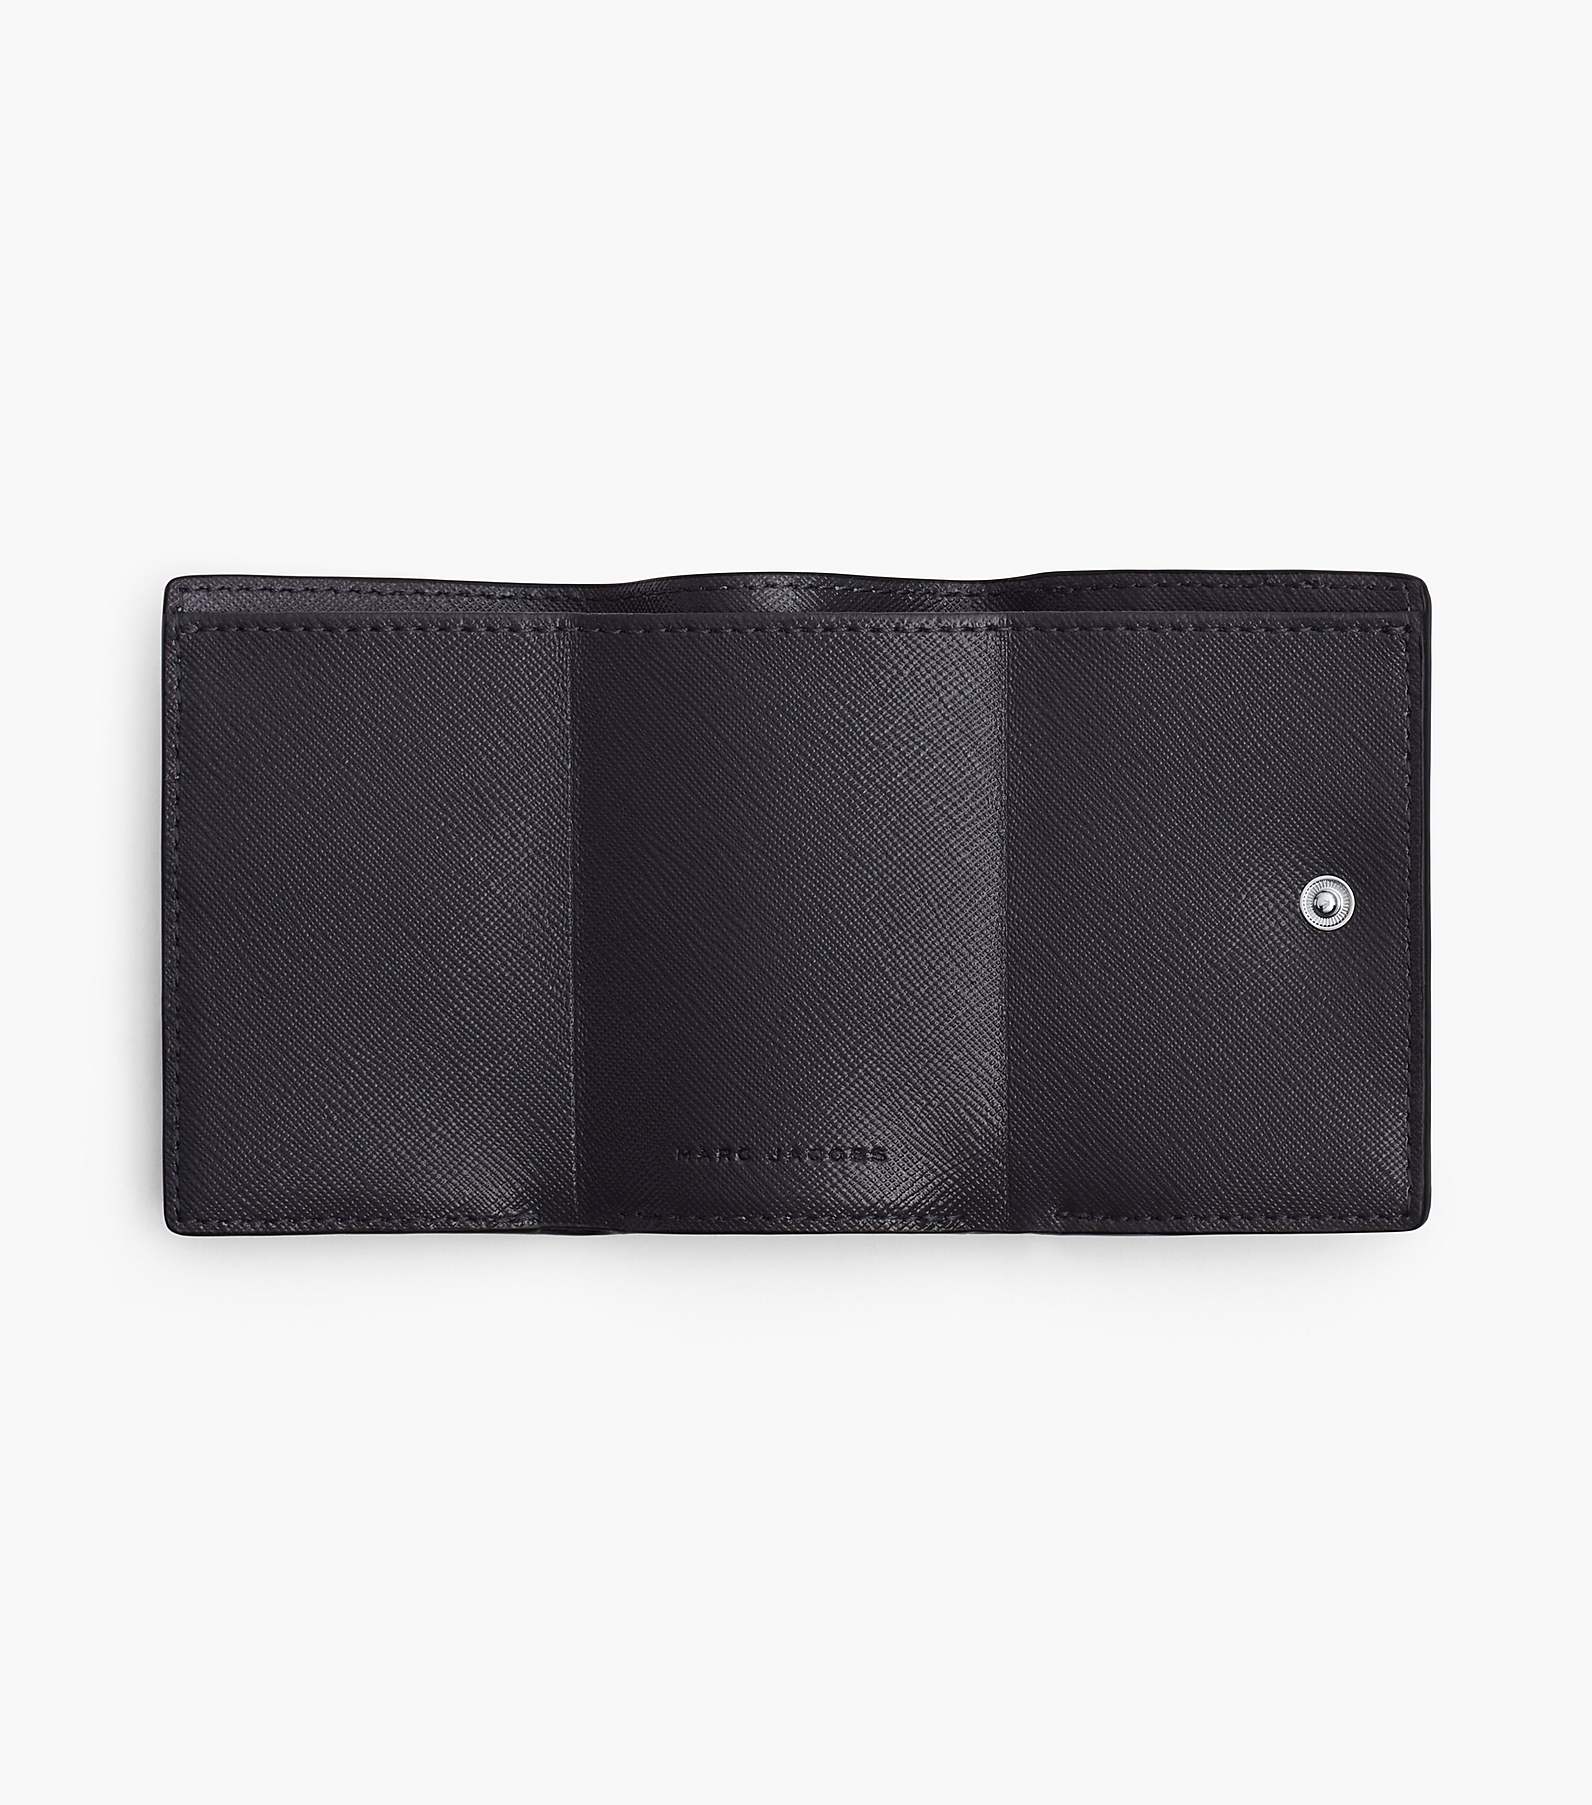 THE UTILITY SNAPSHOT TRIFOLD WALLET MINI | マーク ジェイコブス